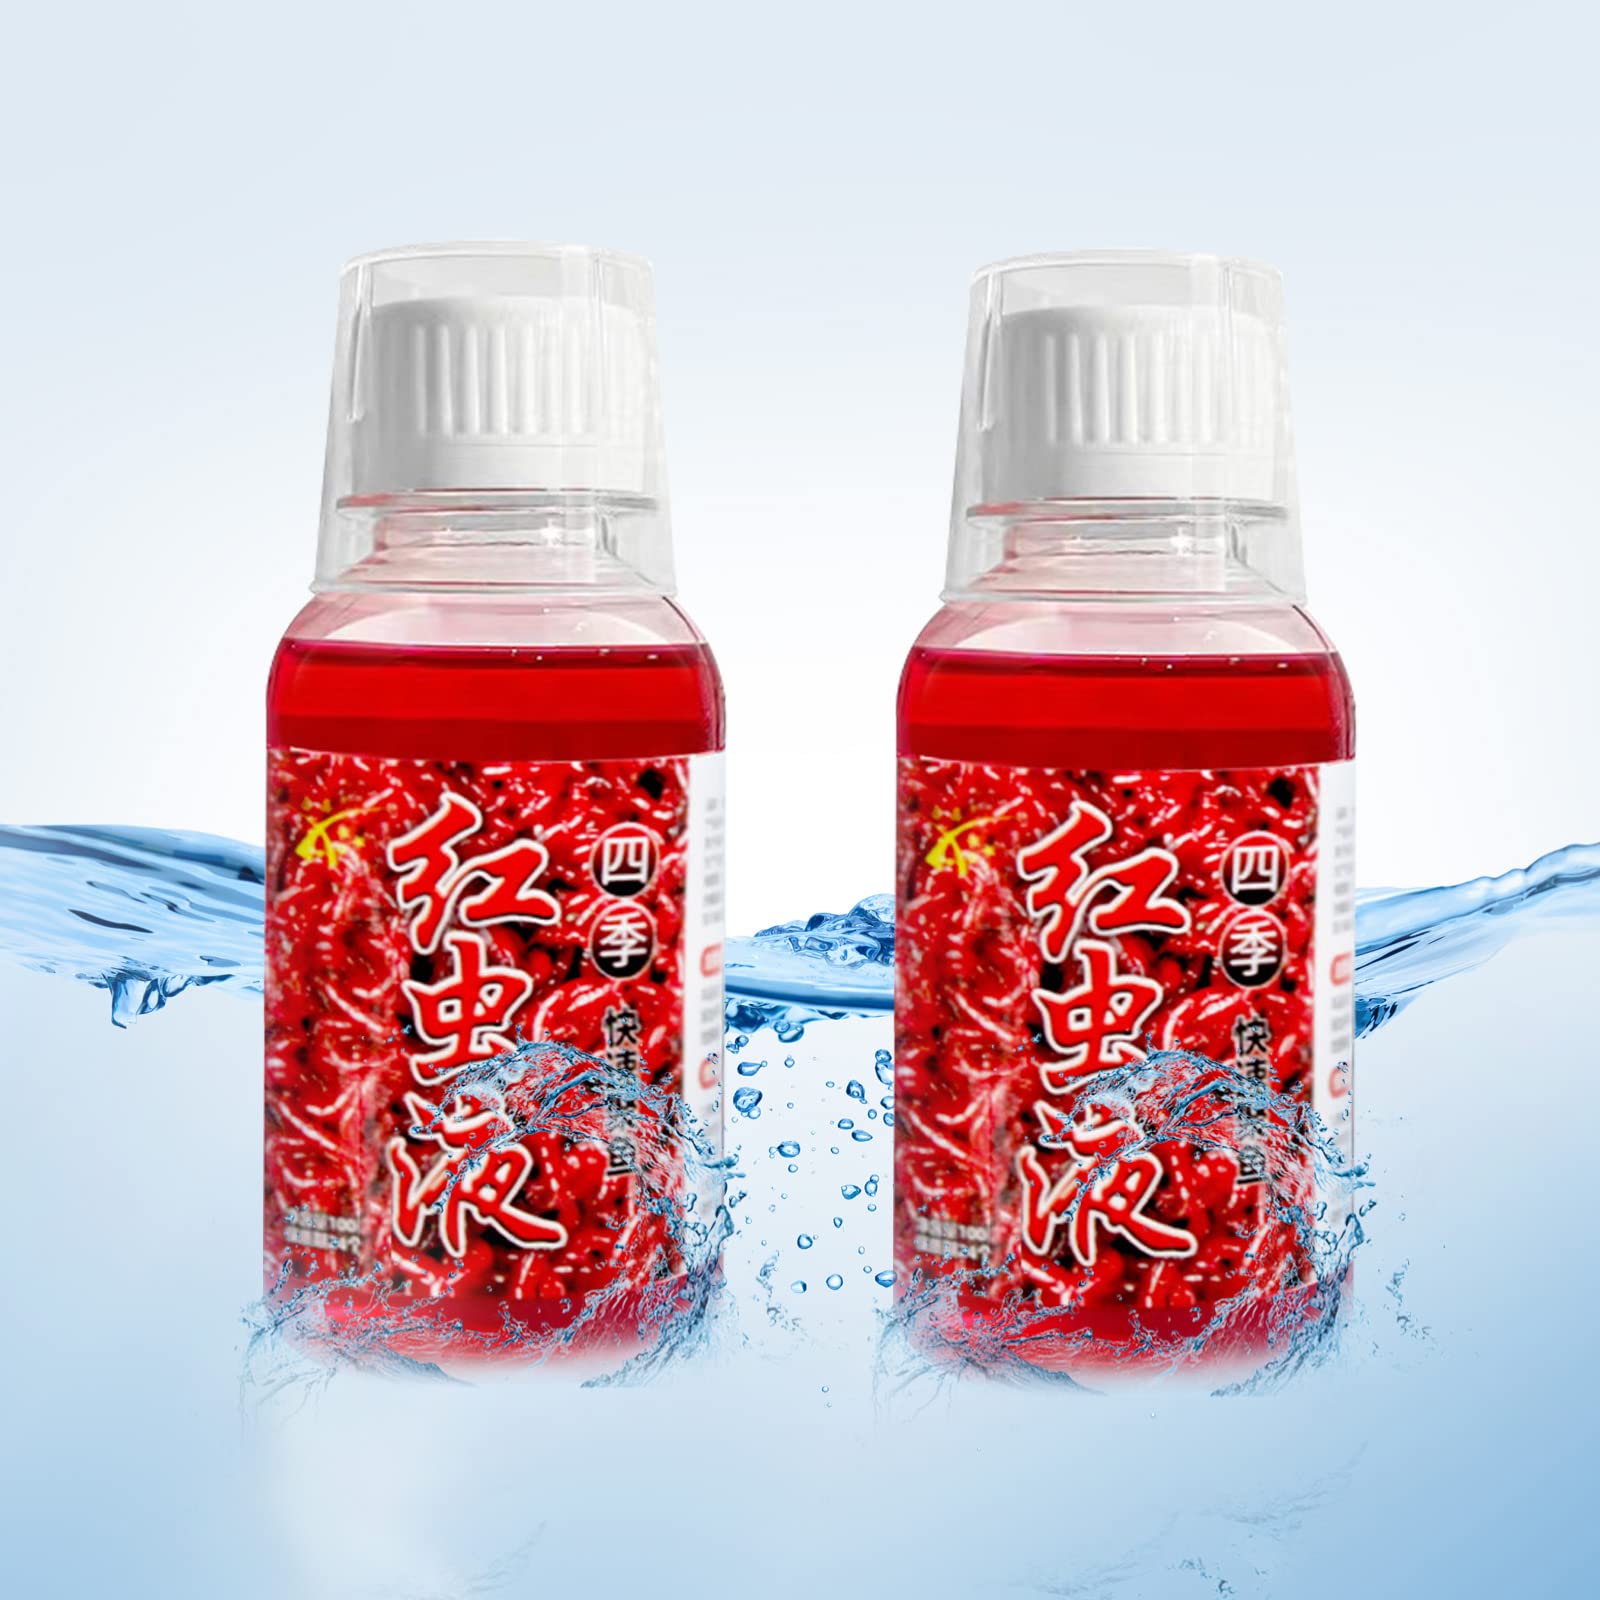 Red Worm Scent Fish Attractants for Baits,Red Worm Liquid Bait Concentrated  Fishing Lures Baits Red